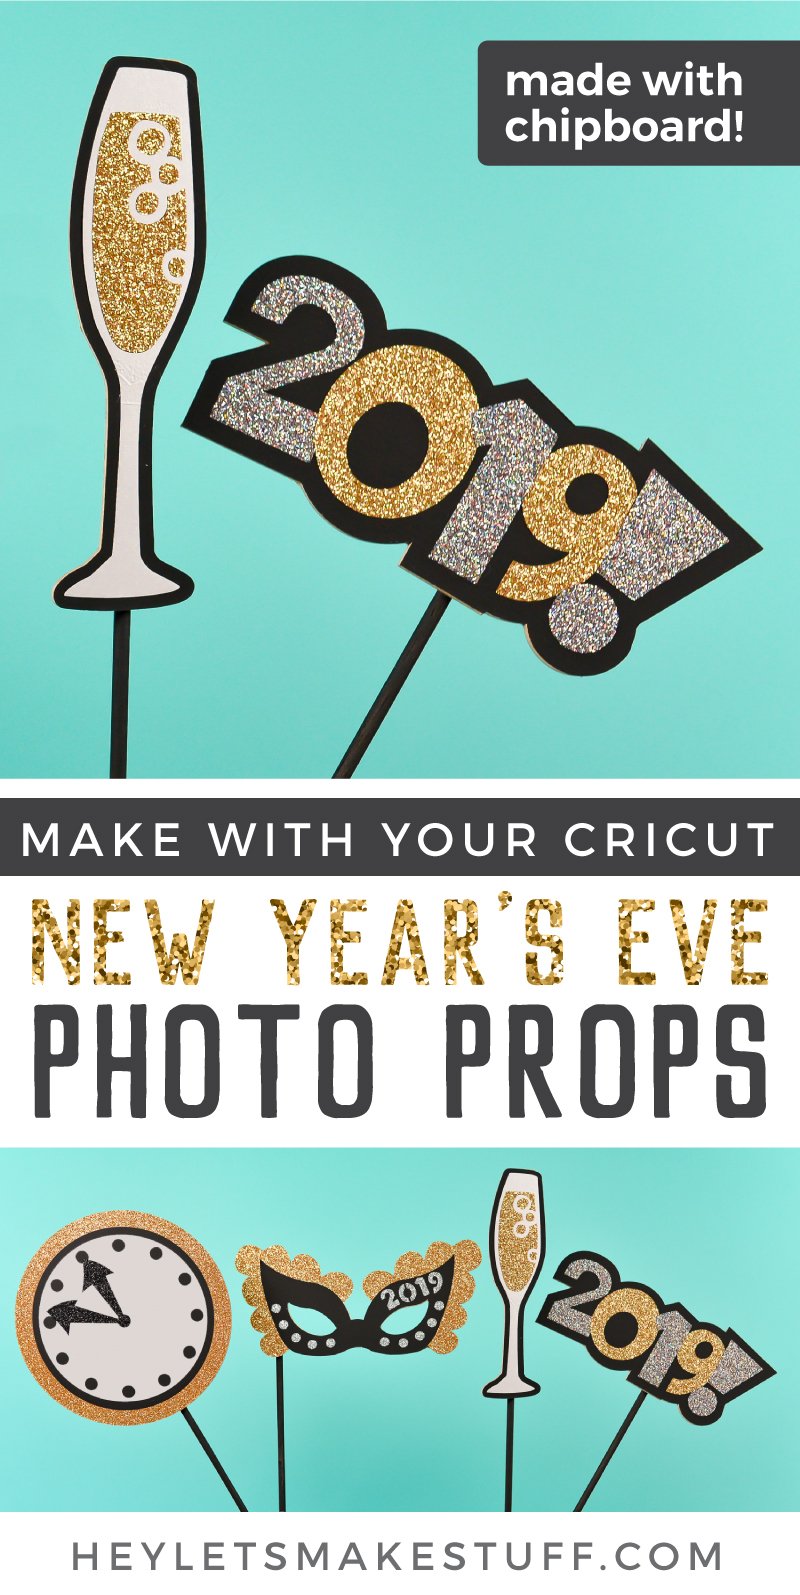 Images of a clock, a mask, a glass of champagne and the year 2019 made from chipboard with advertising from HEYLETSMAKESTUFF.COM on New Year\'s Eve Photo Props to make with your Cricut